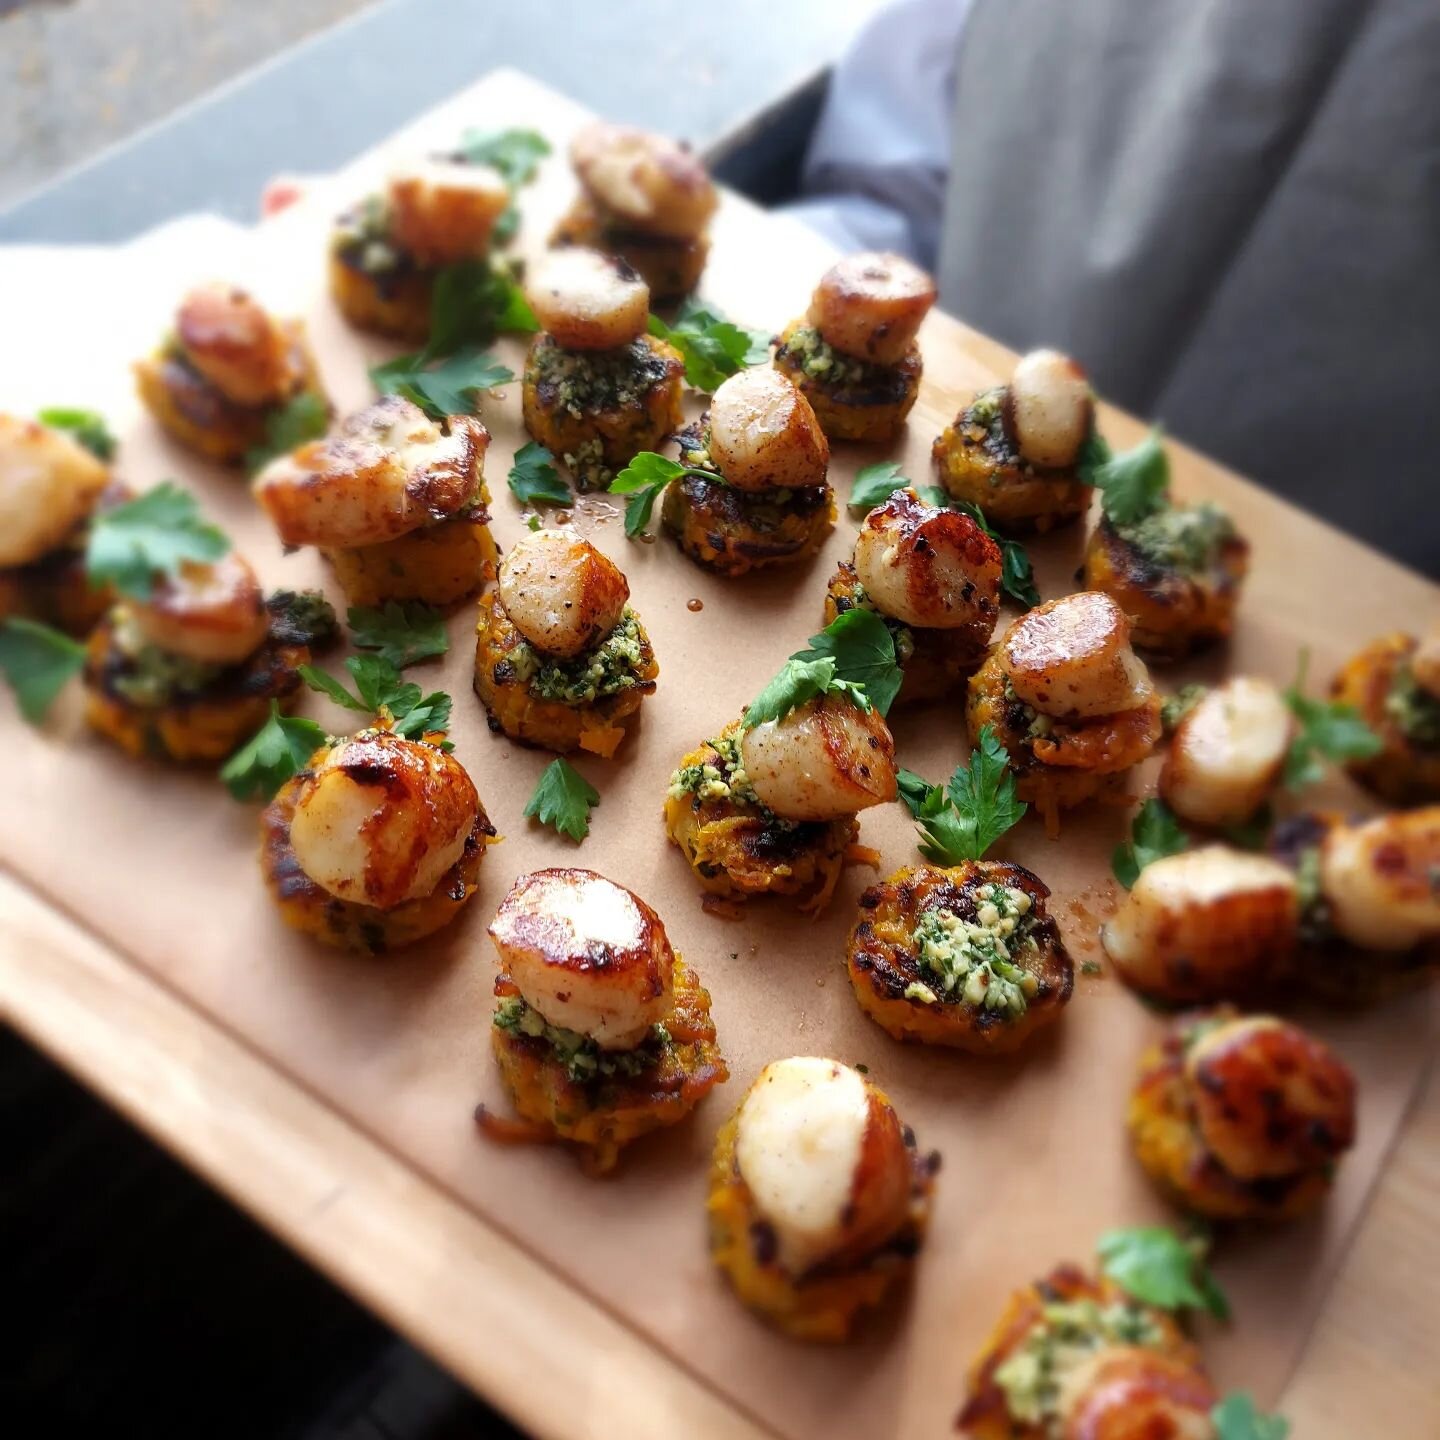 Seared scallops on lemongrass pumpkin cakes from today's delightful wedding.  Congratulations G &amp; J, what a wonderful celebration!

More pics to come....